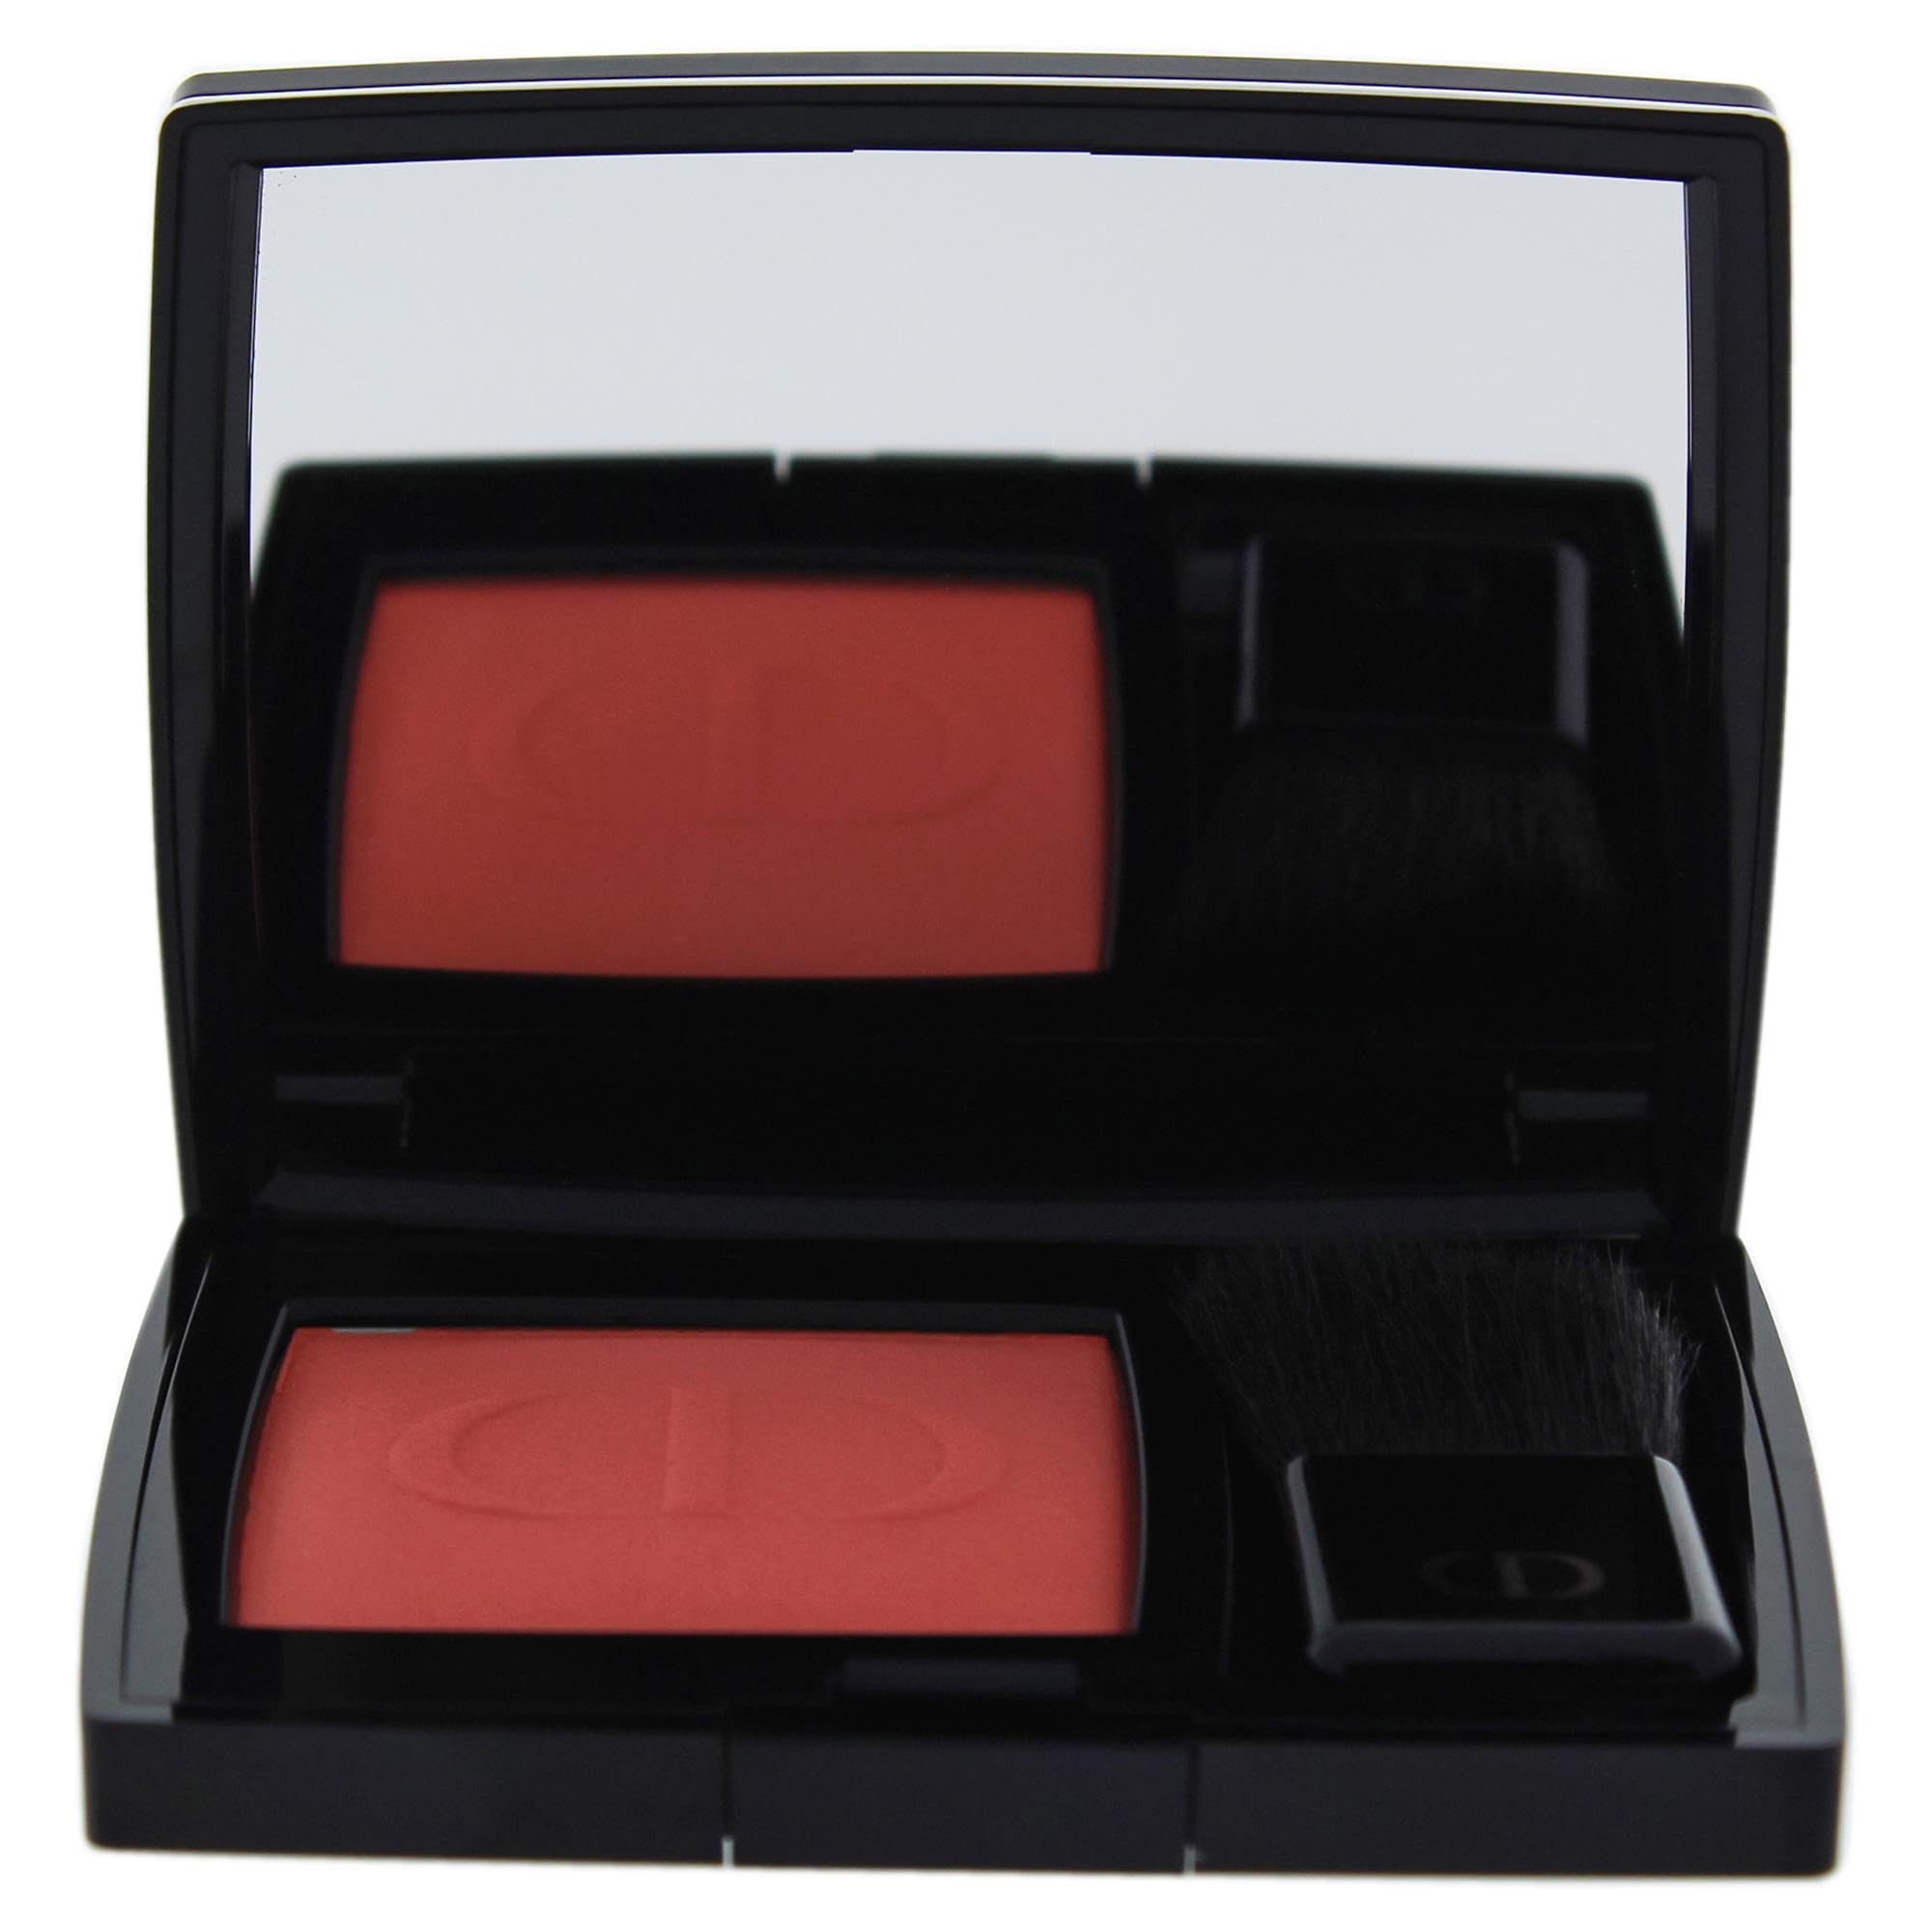 Dior Rouge Blush - 028 Actrice